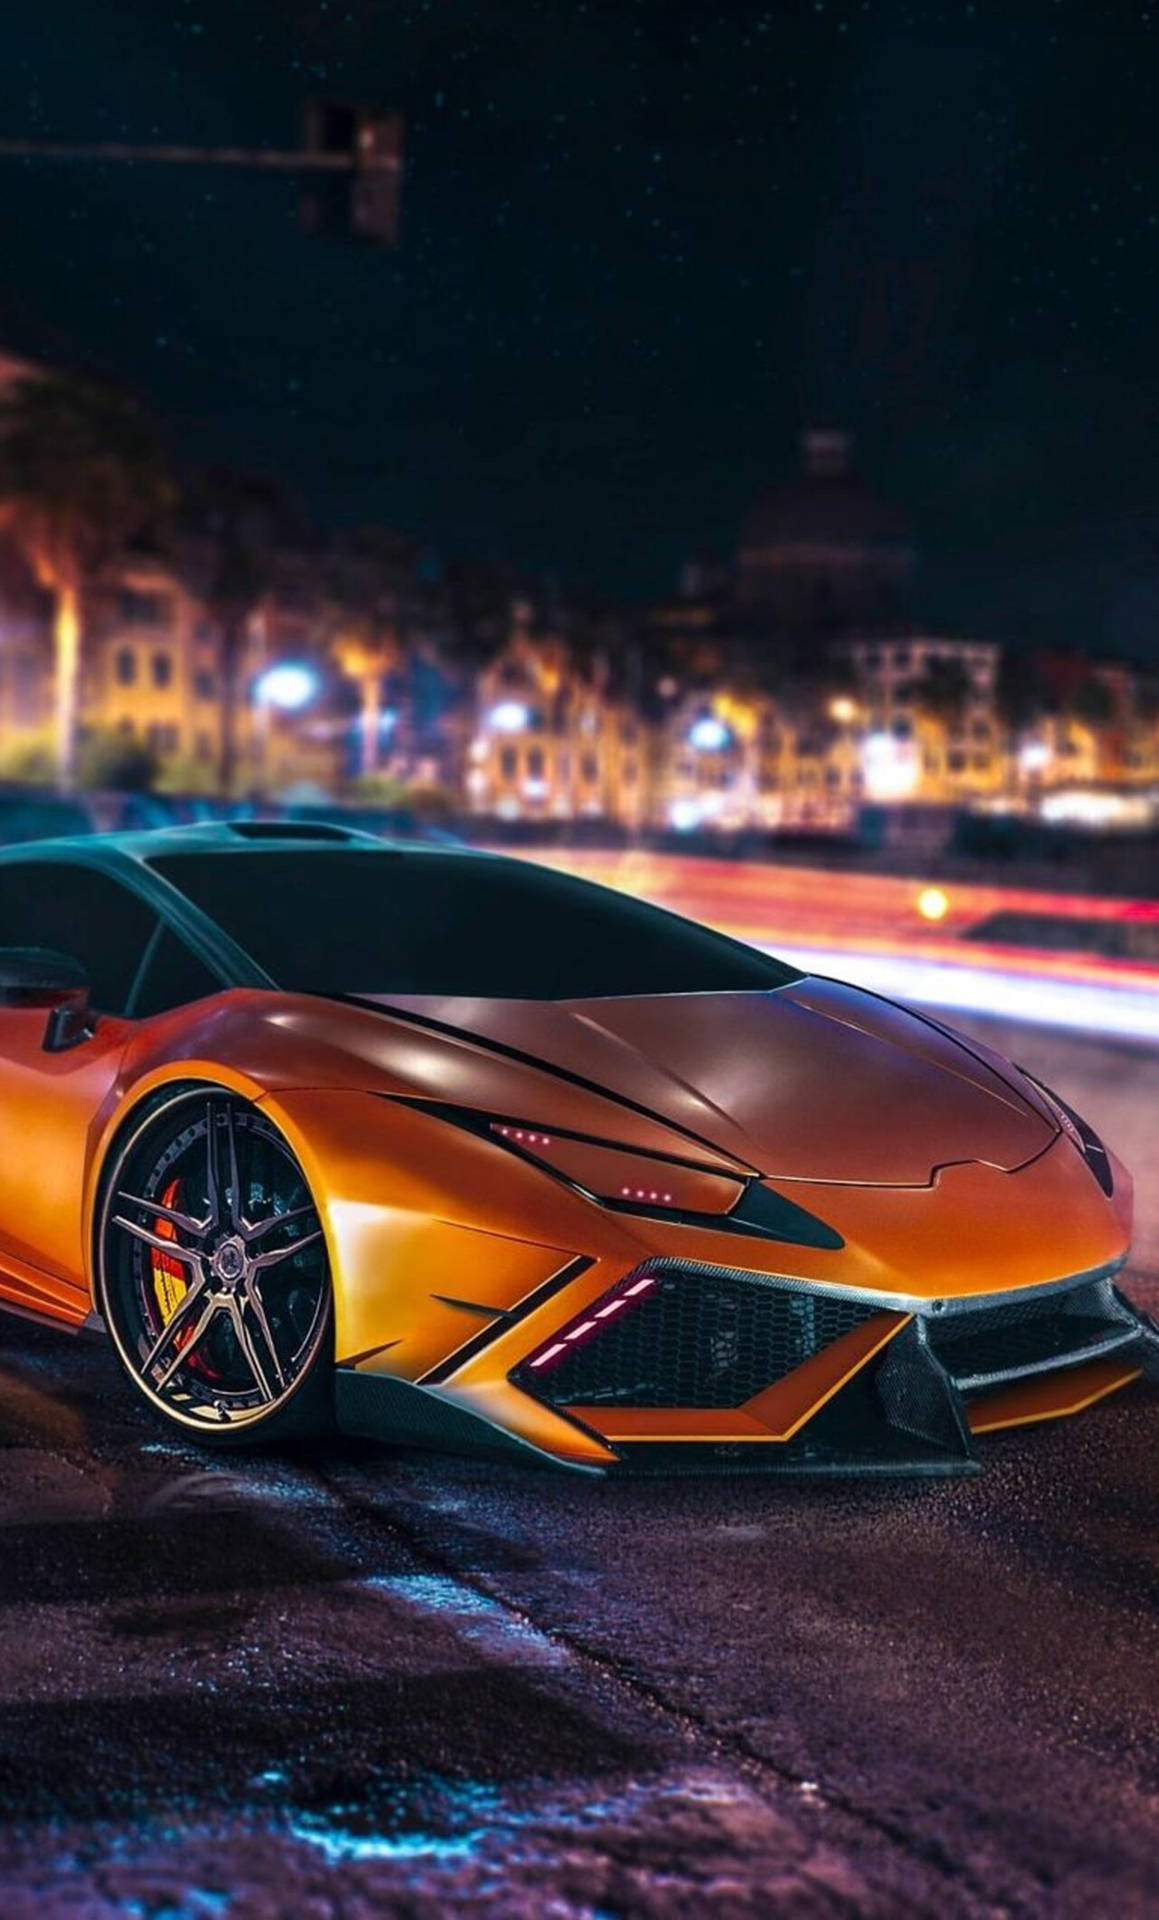 Take your iPhone game up a gear with this 4K Lamborghini-themed wallpaper Wallpaper